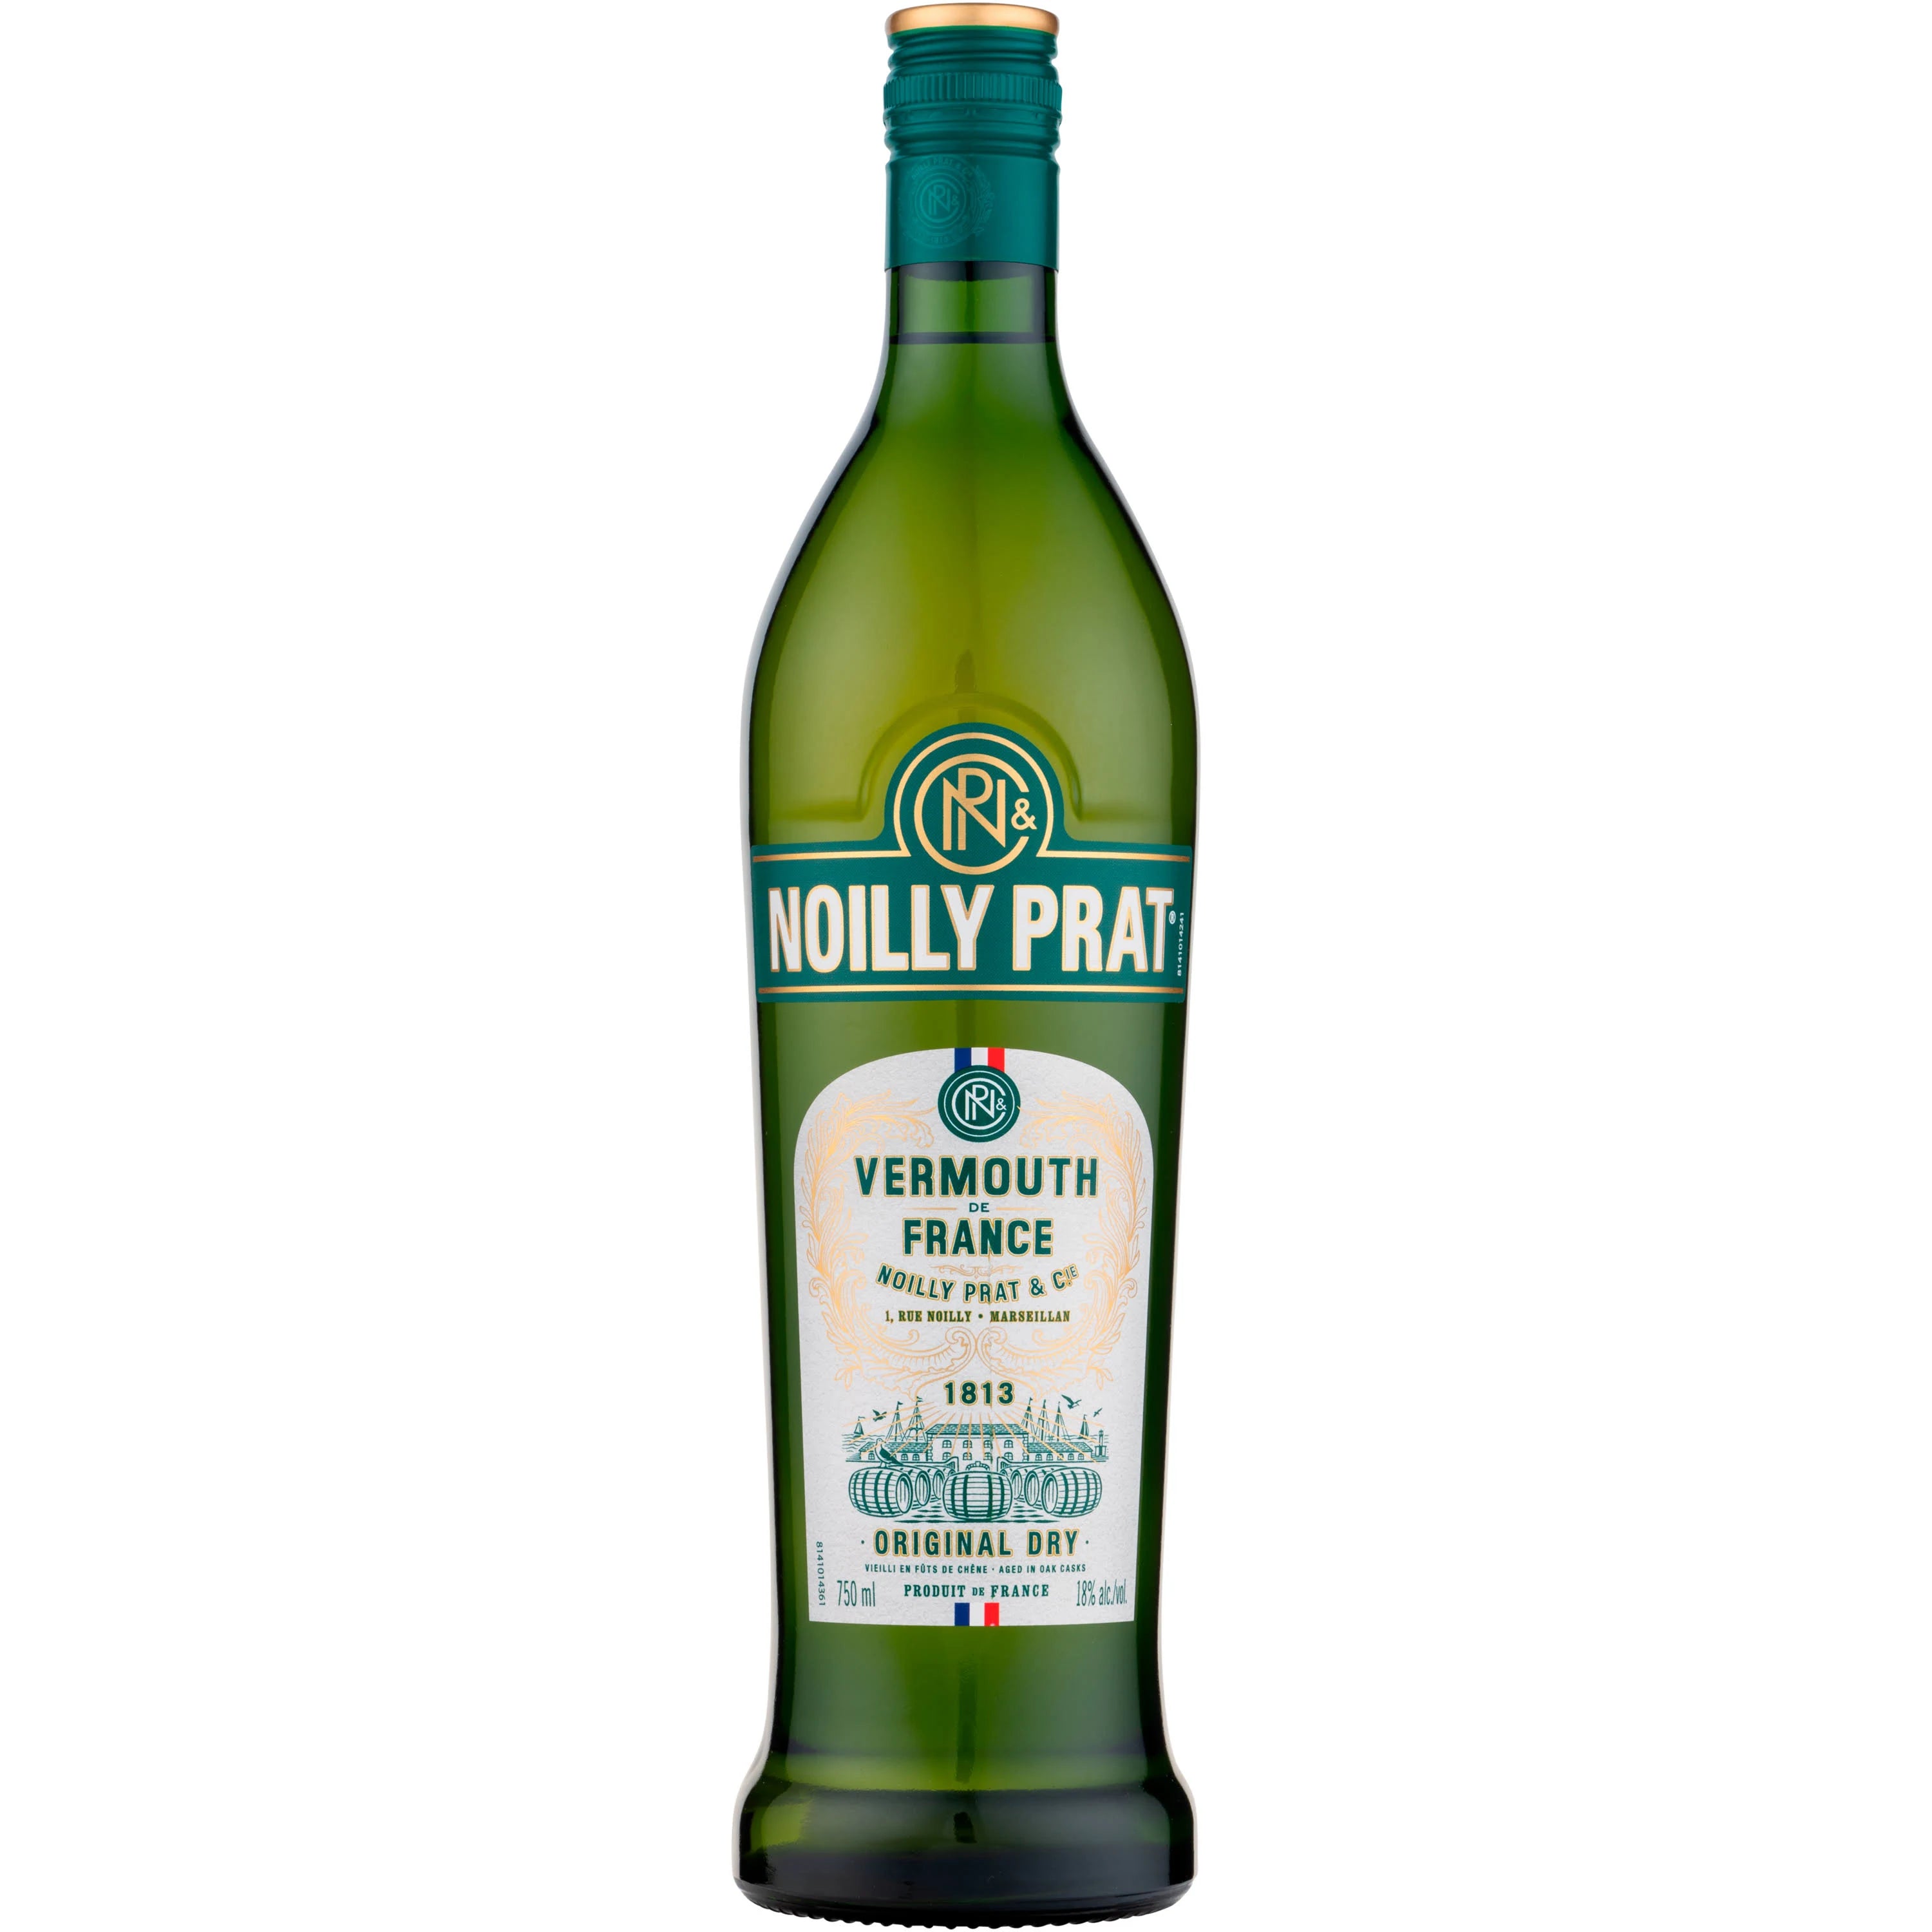 Noilly Prat Vermouth De France Original Dry 1L a tall elegantly shaped green glass bottle with a white and green label and green gold top